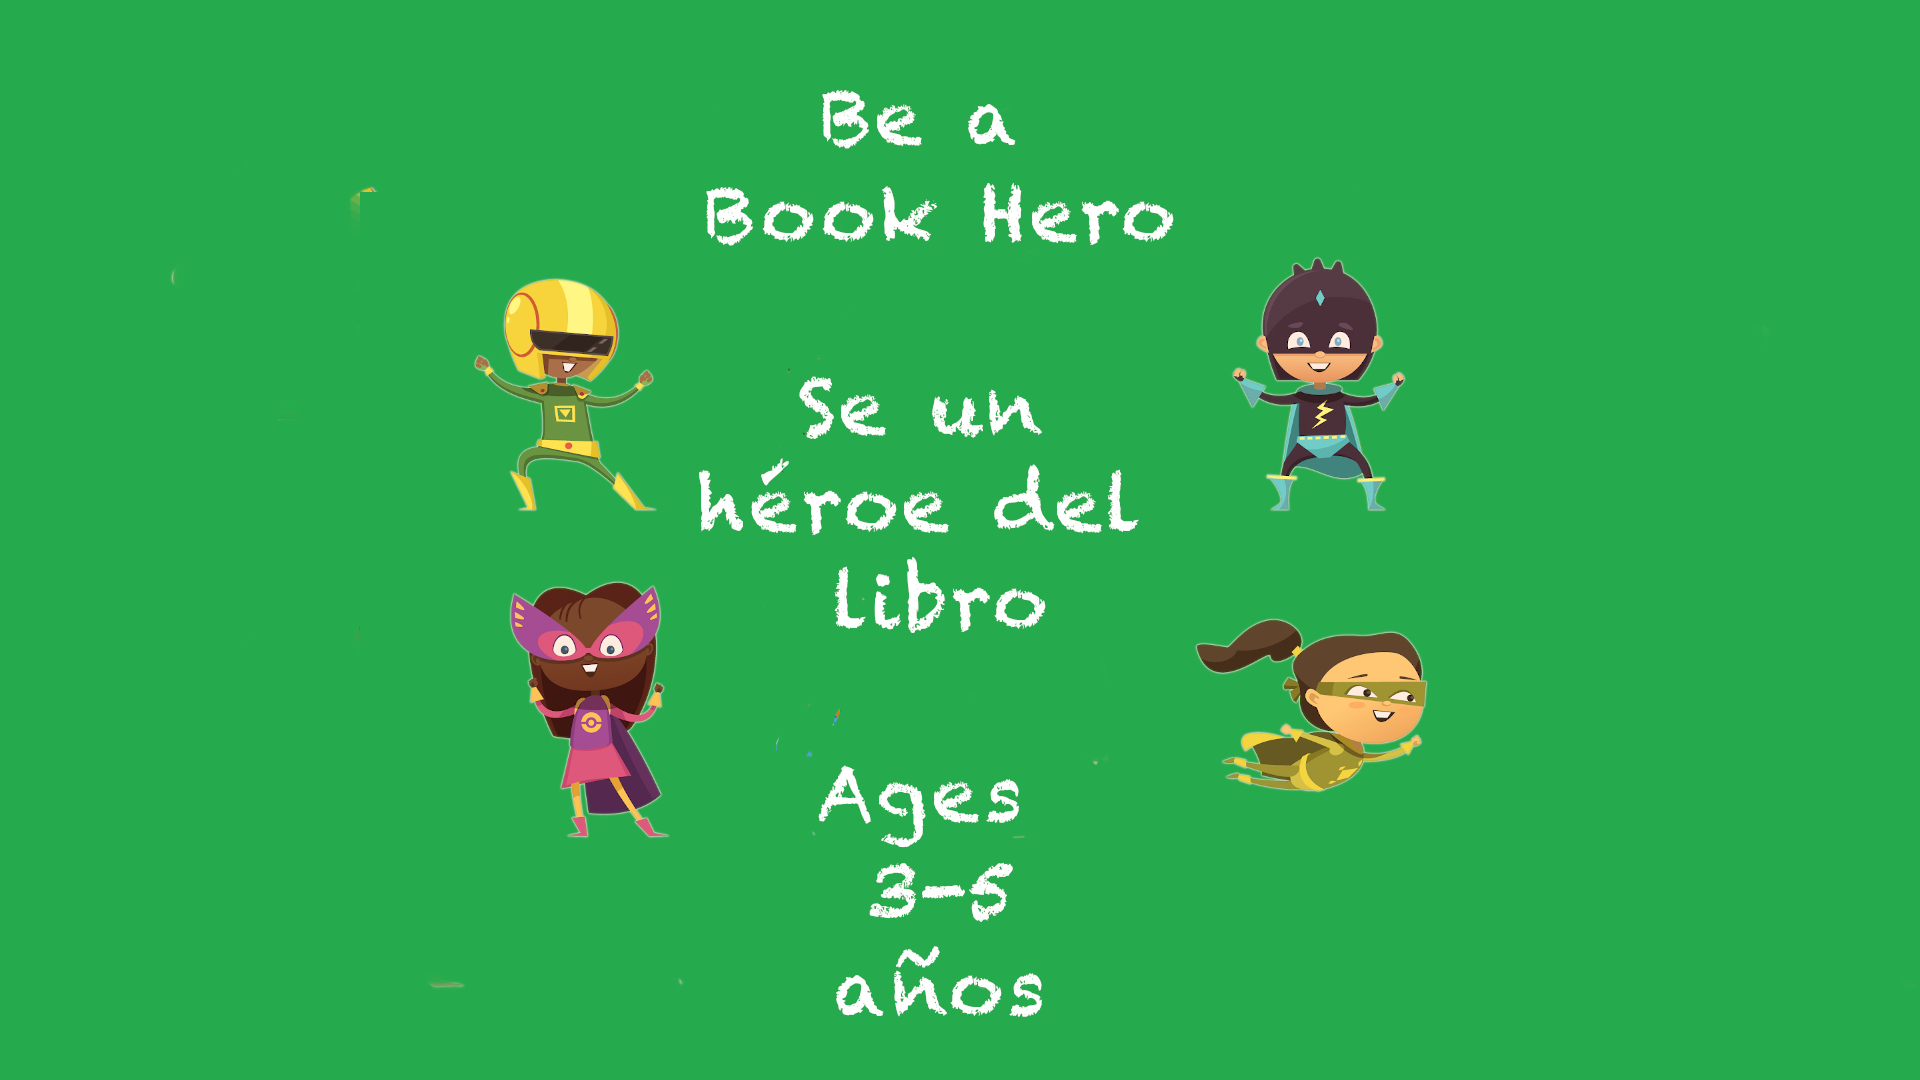 Be a Book Hero 3-5 year olds